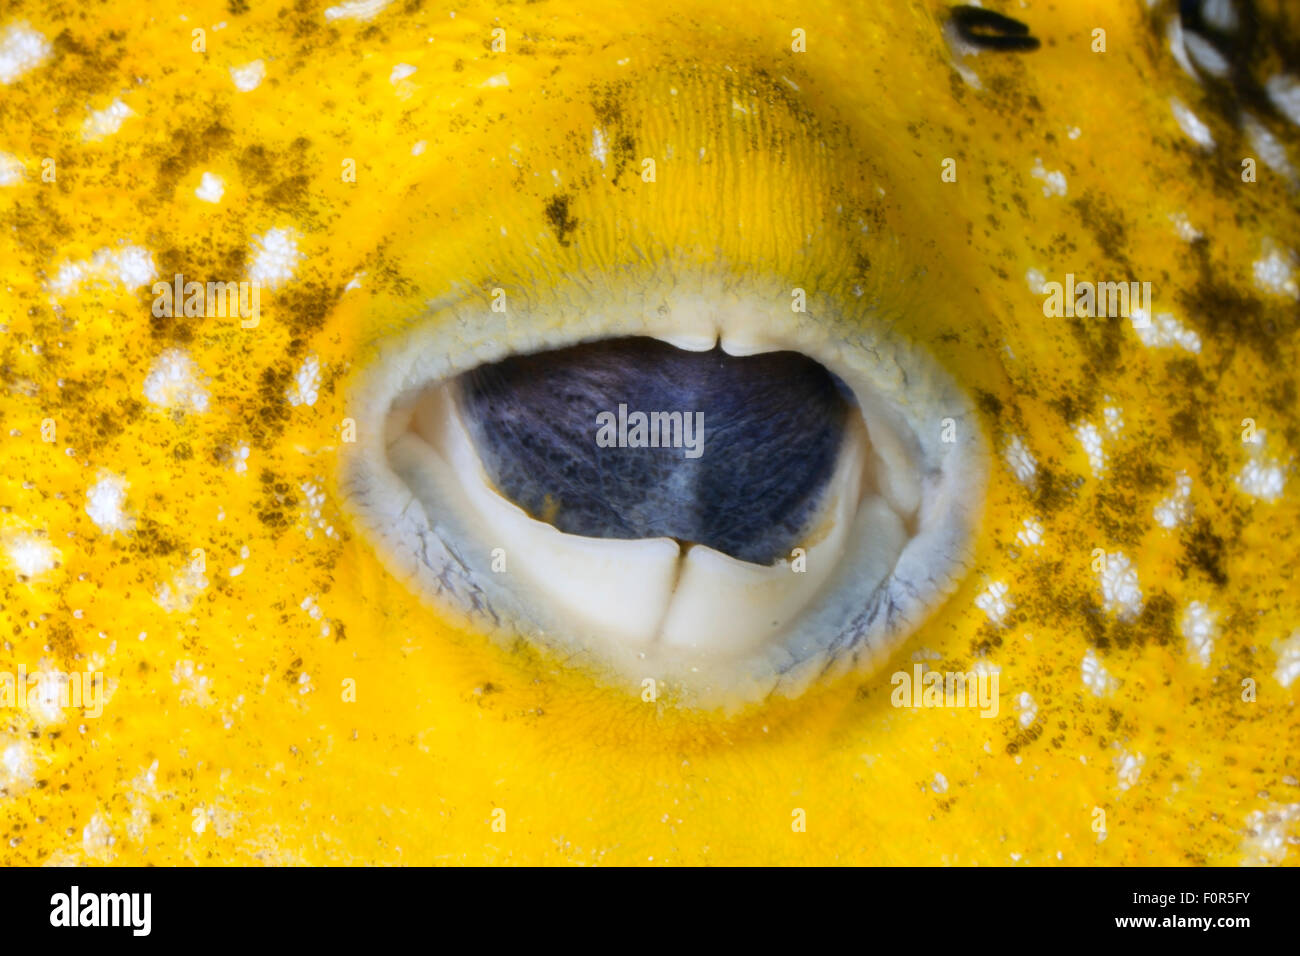 VERY CLOSE-UP VIEW OF YELLOW PUFFER FISH MOUTH Stock Photo